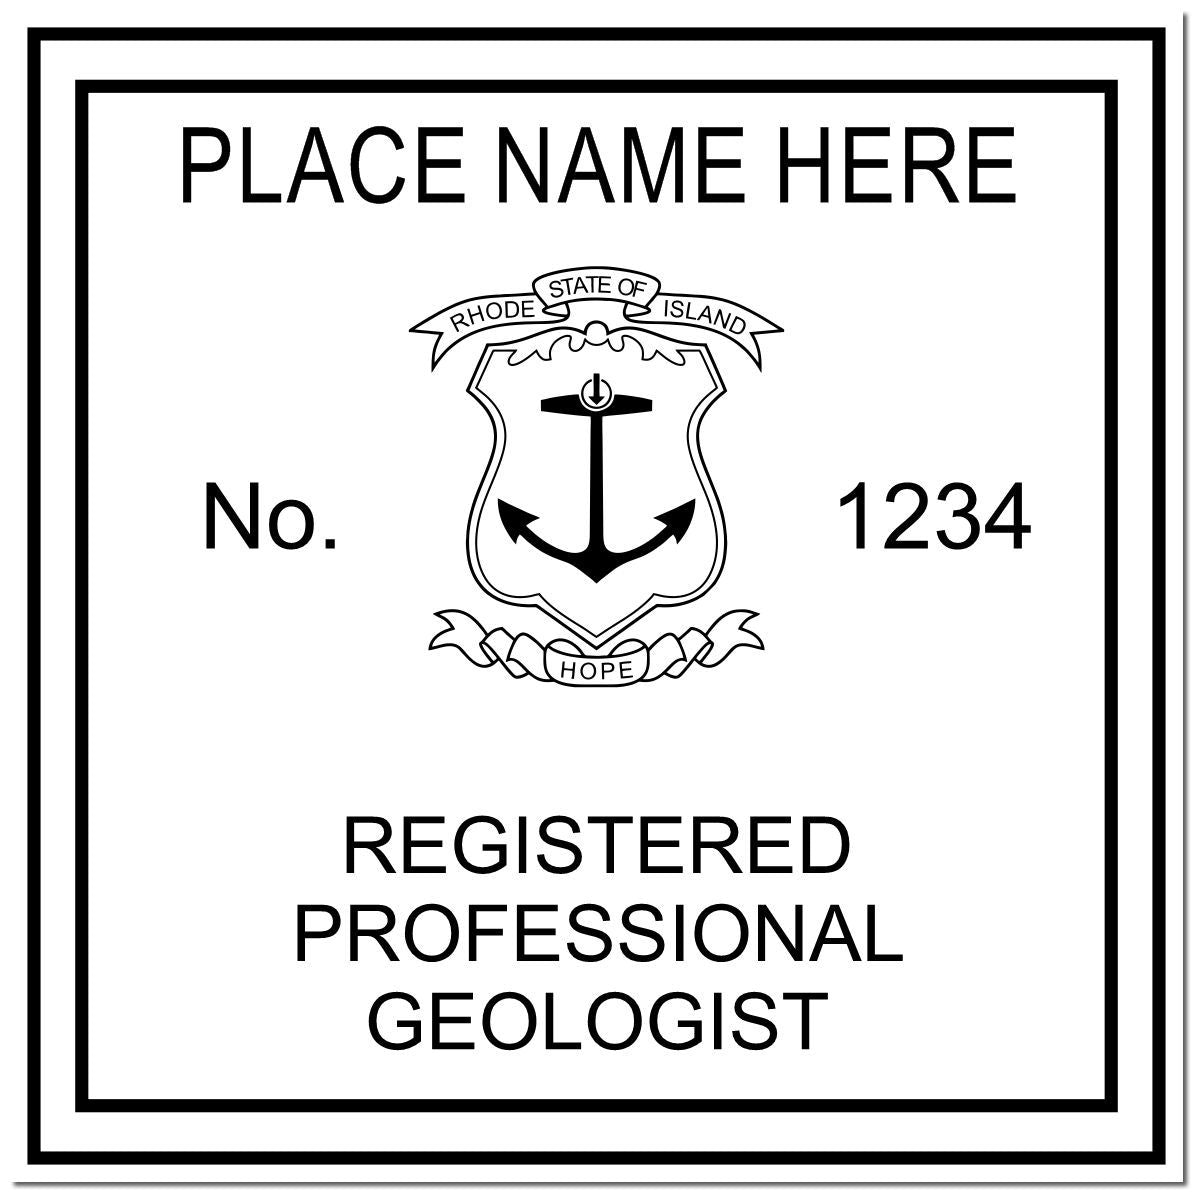 This paper is stamped with a sample imprint of the Digital Rhode Island Geologist Stamp, Electronic Seal for Rhode Island Geologist, signifying its quality and reliability.